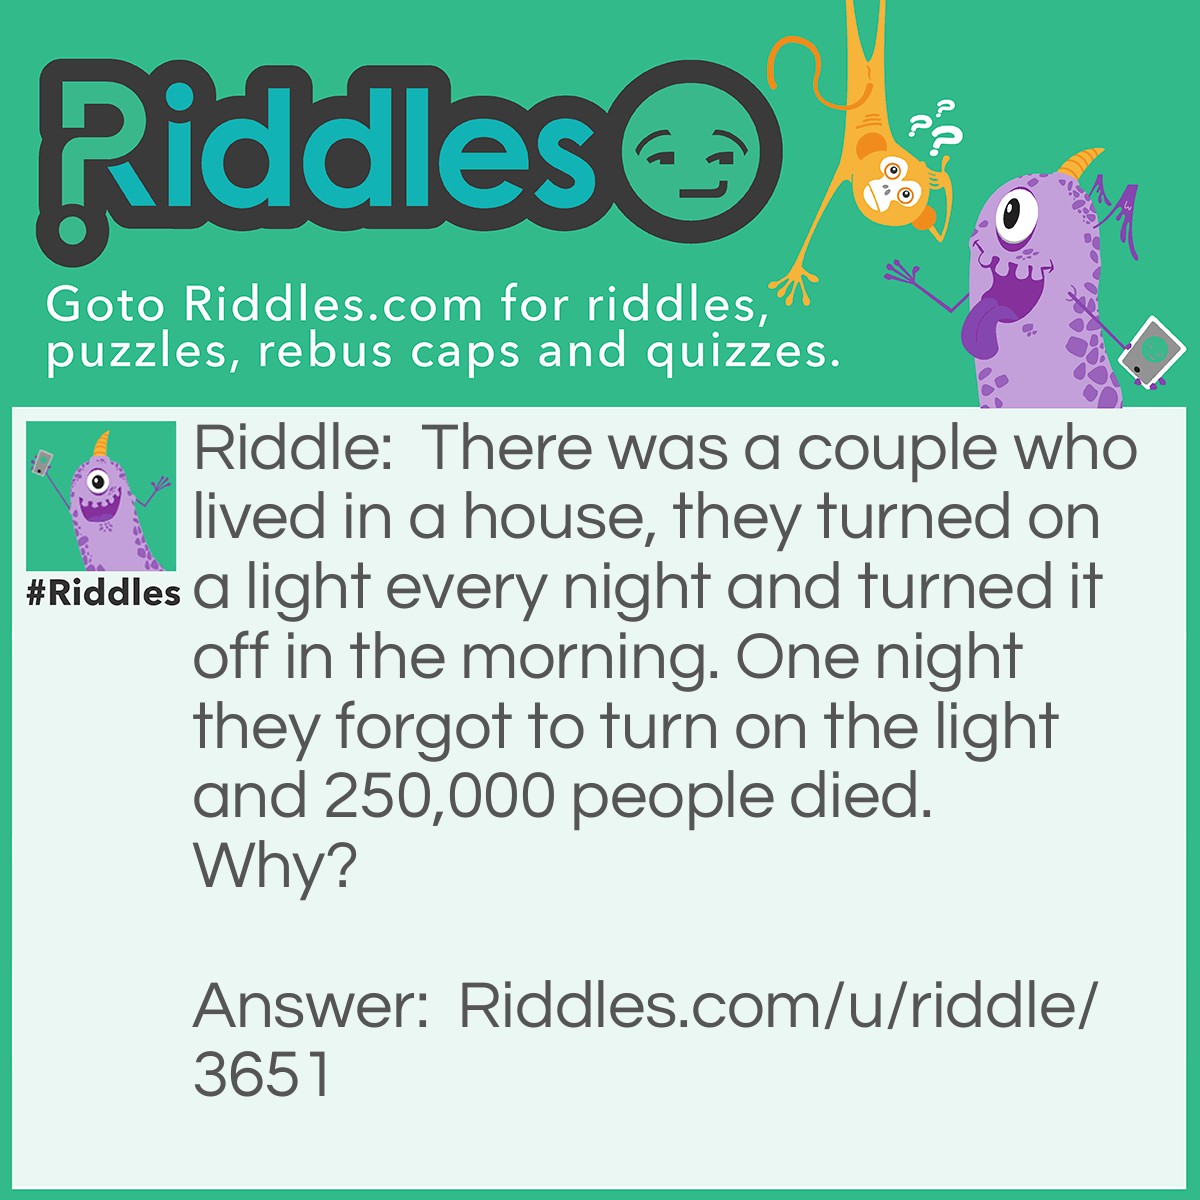 Riddle: There was a couple who lived in a house, they turned on a light every night and turned it off in the morning. One night they forgot to turn on the light and 250,000 people died.  Why? Answer: It was a lighthouse!